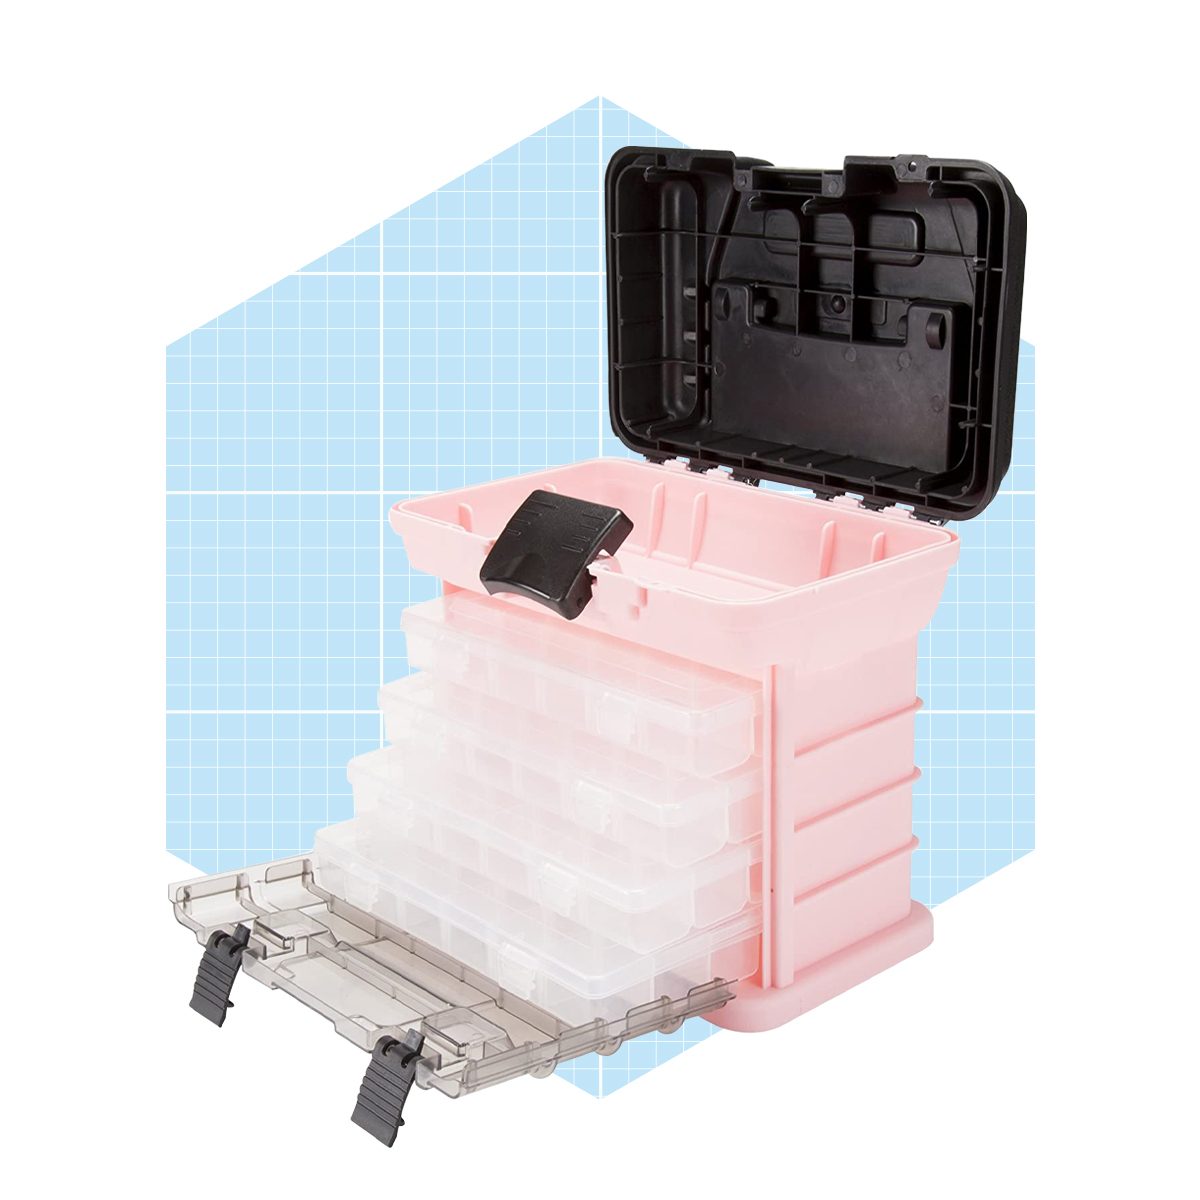 https://www.familyhandyman.com/wp-content/uploads/2019/12/Pink-Tool-Box-Durable-Tackle-Box-Organizer-with-4-Compartments-ecomm-amazon.com_.jpg?fit=700%2C700